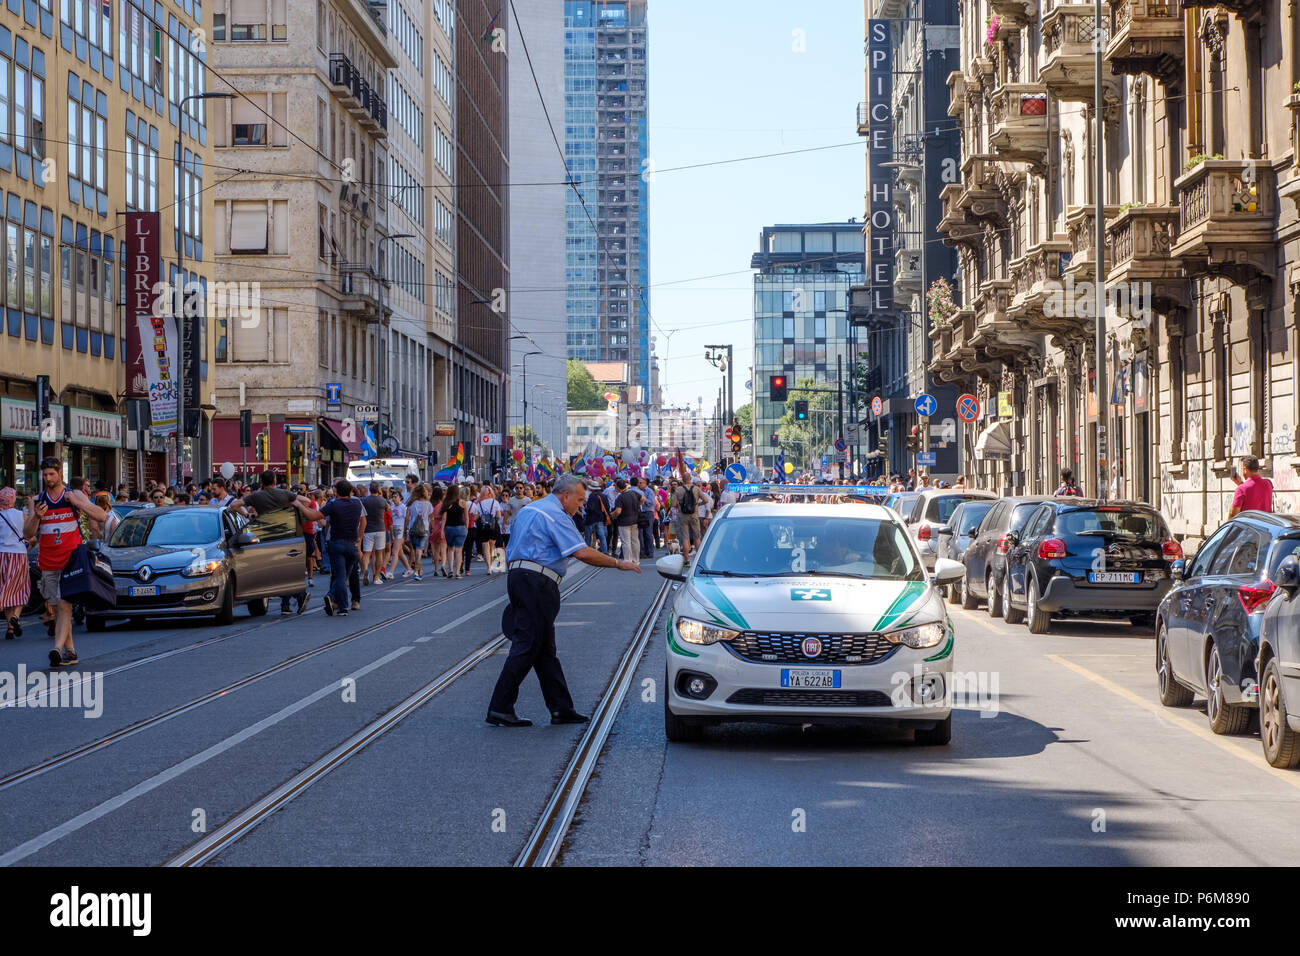 Milan, Italy. 30th Jun, 2018. Local police car at the start of the parade of Milan Pride 2018. Milan, Italy. June 30, 2018. Credit: Gentian Polovina/Alamy Live News Stock Photo